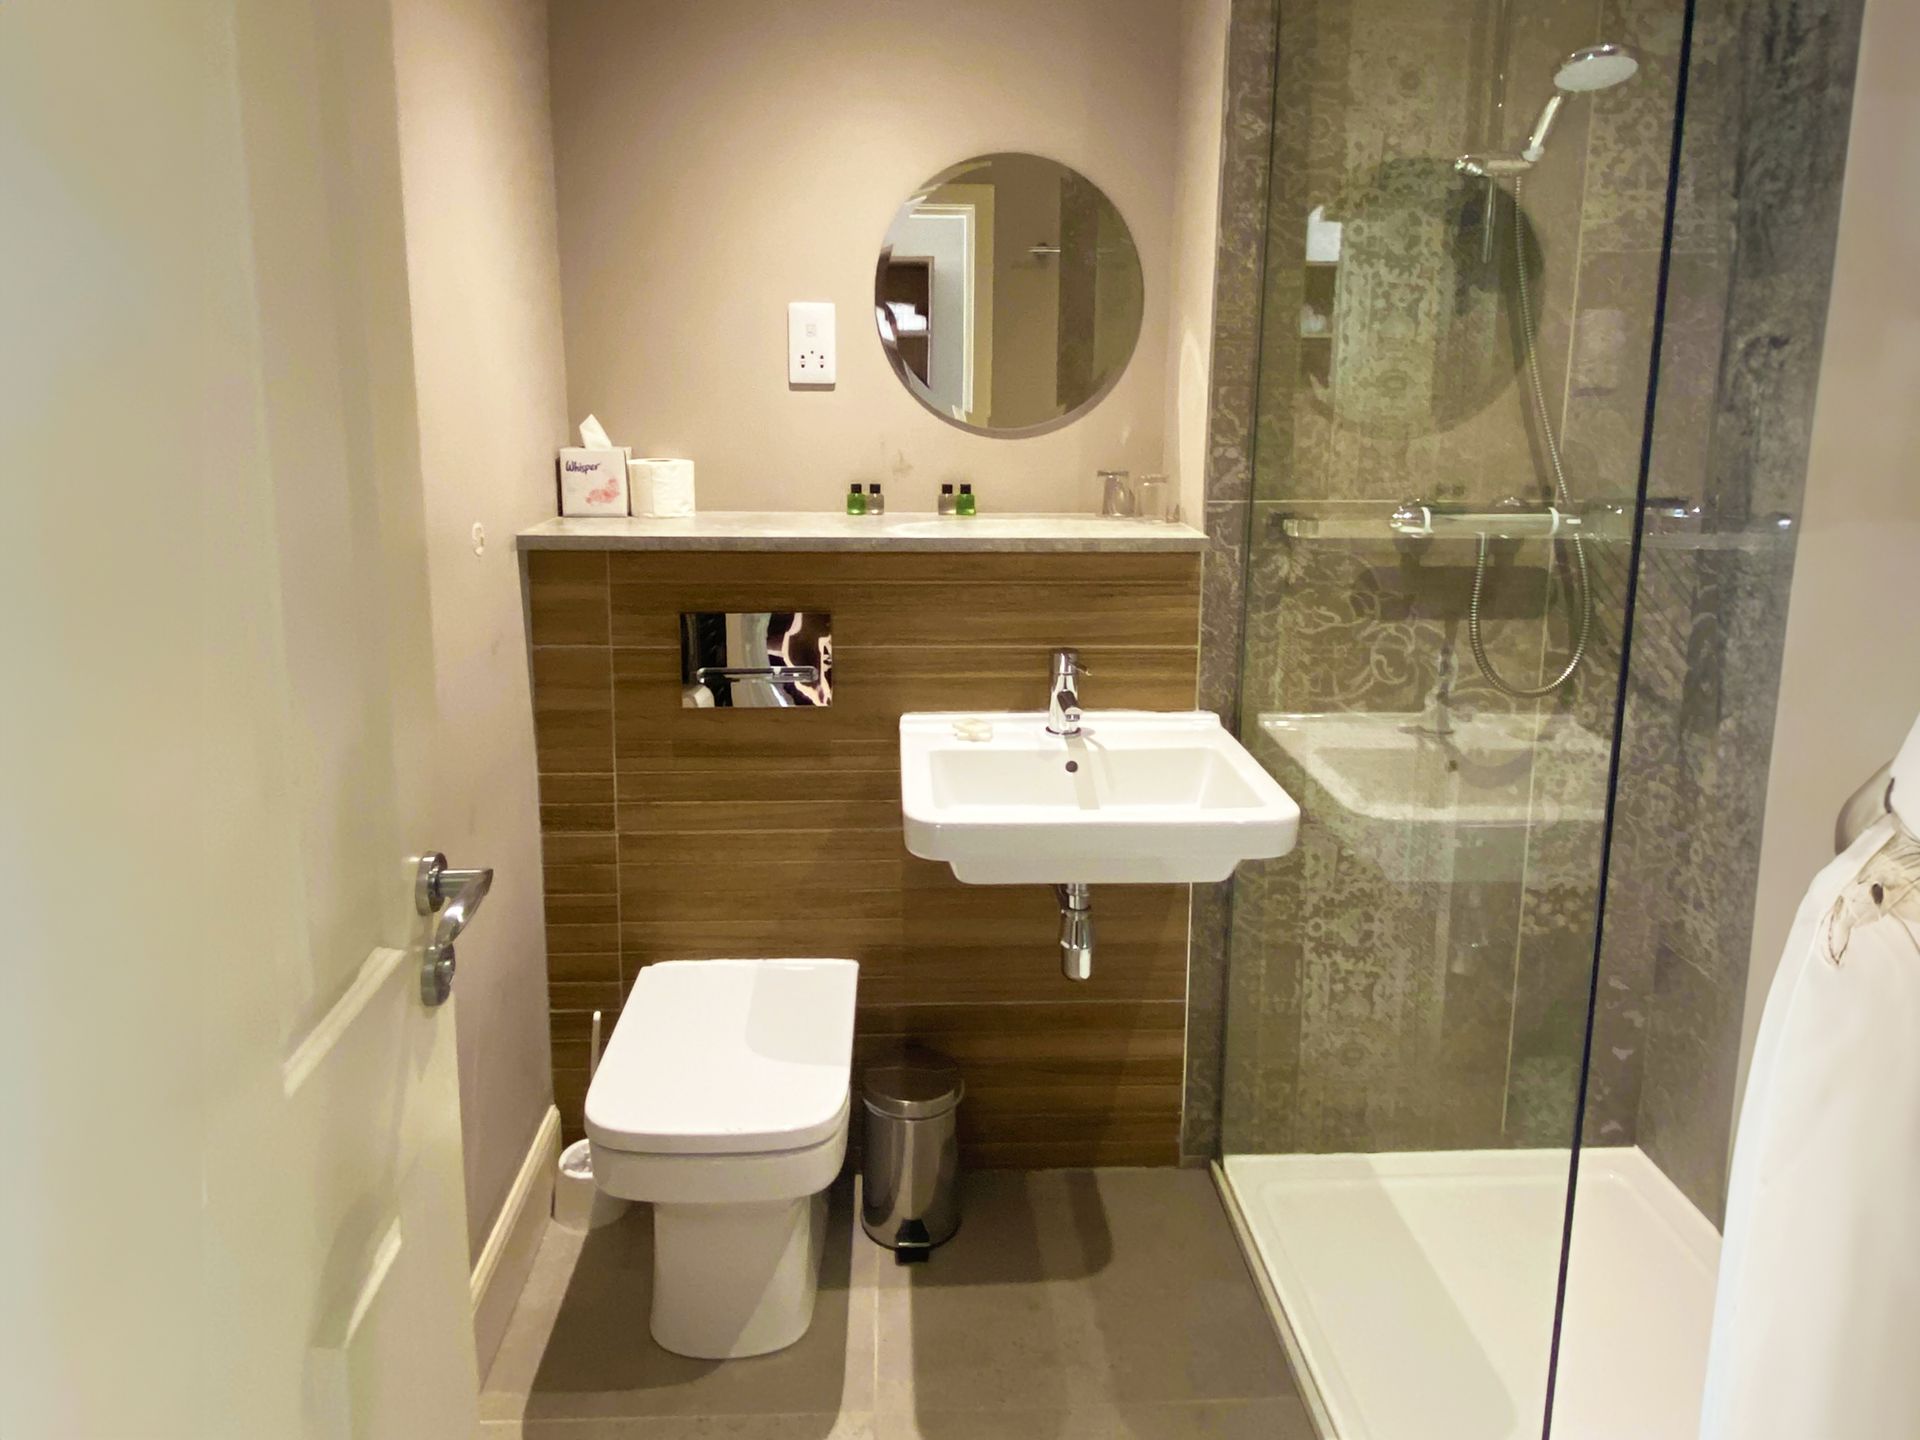 Bathrooom of Deluxe double or twin sea view at Balmacara Hotel at the Highlands in Scotland